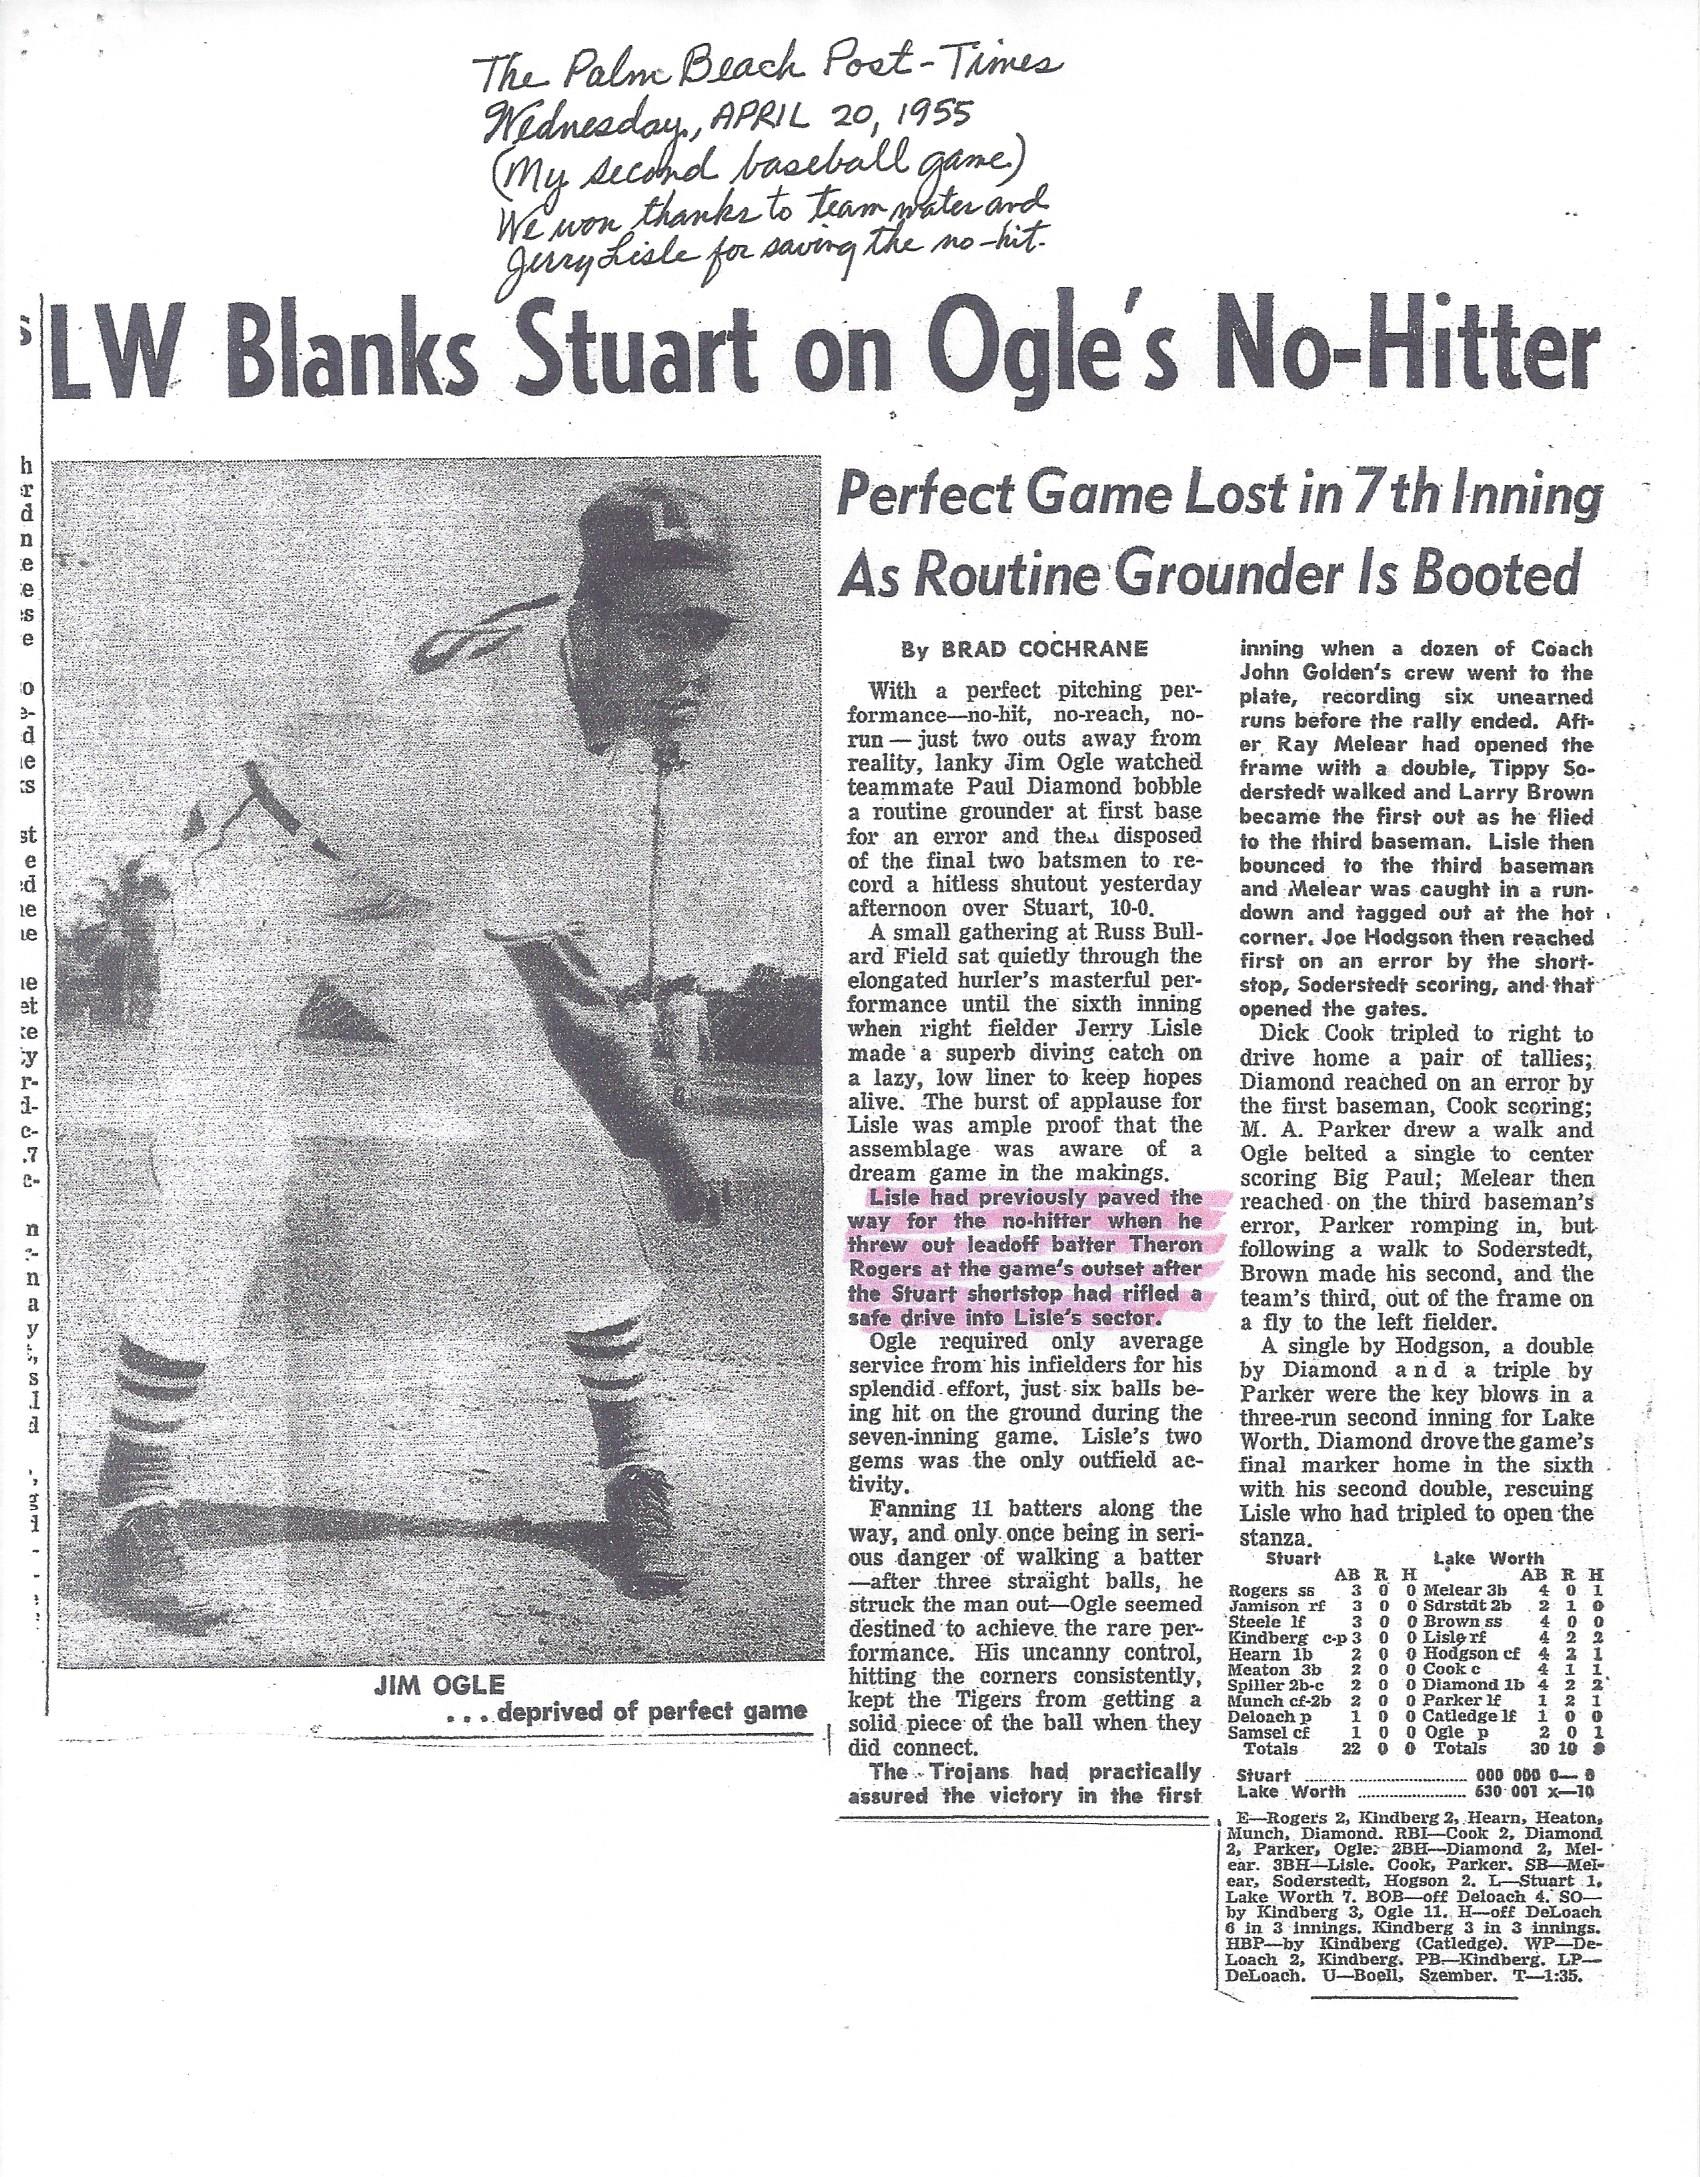 Newspaper clipping of Jim’s NO-HITTER he pitched for his high school’s baseball team.